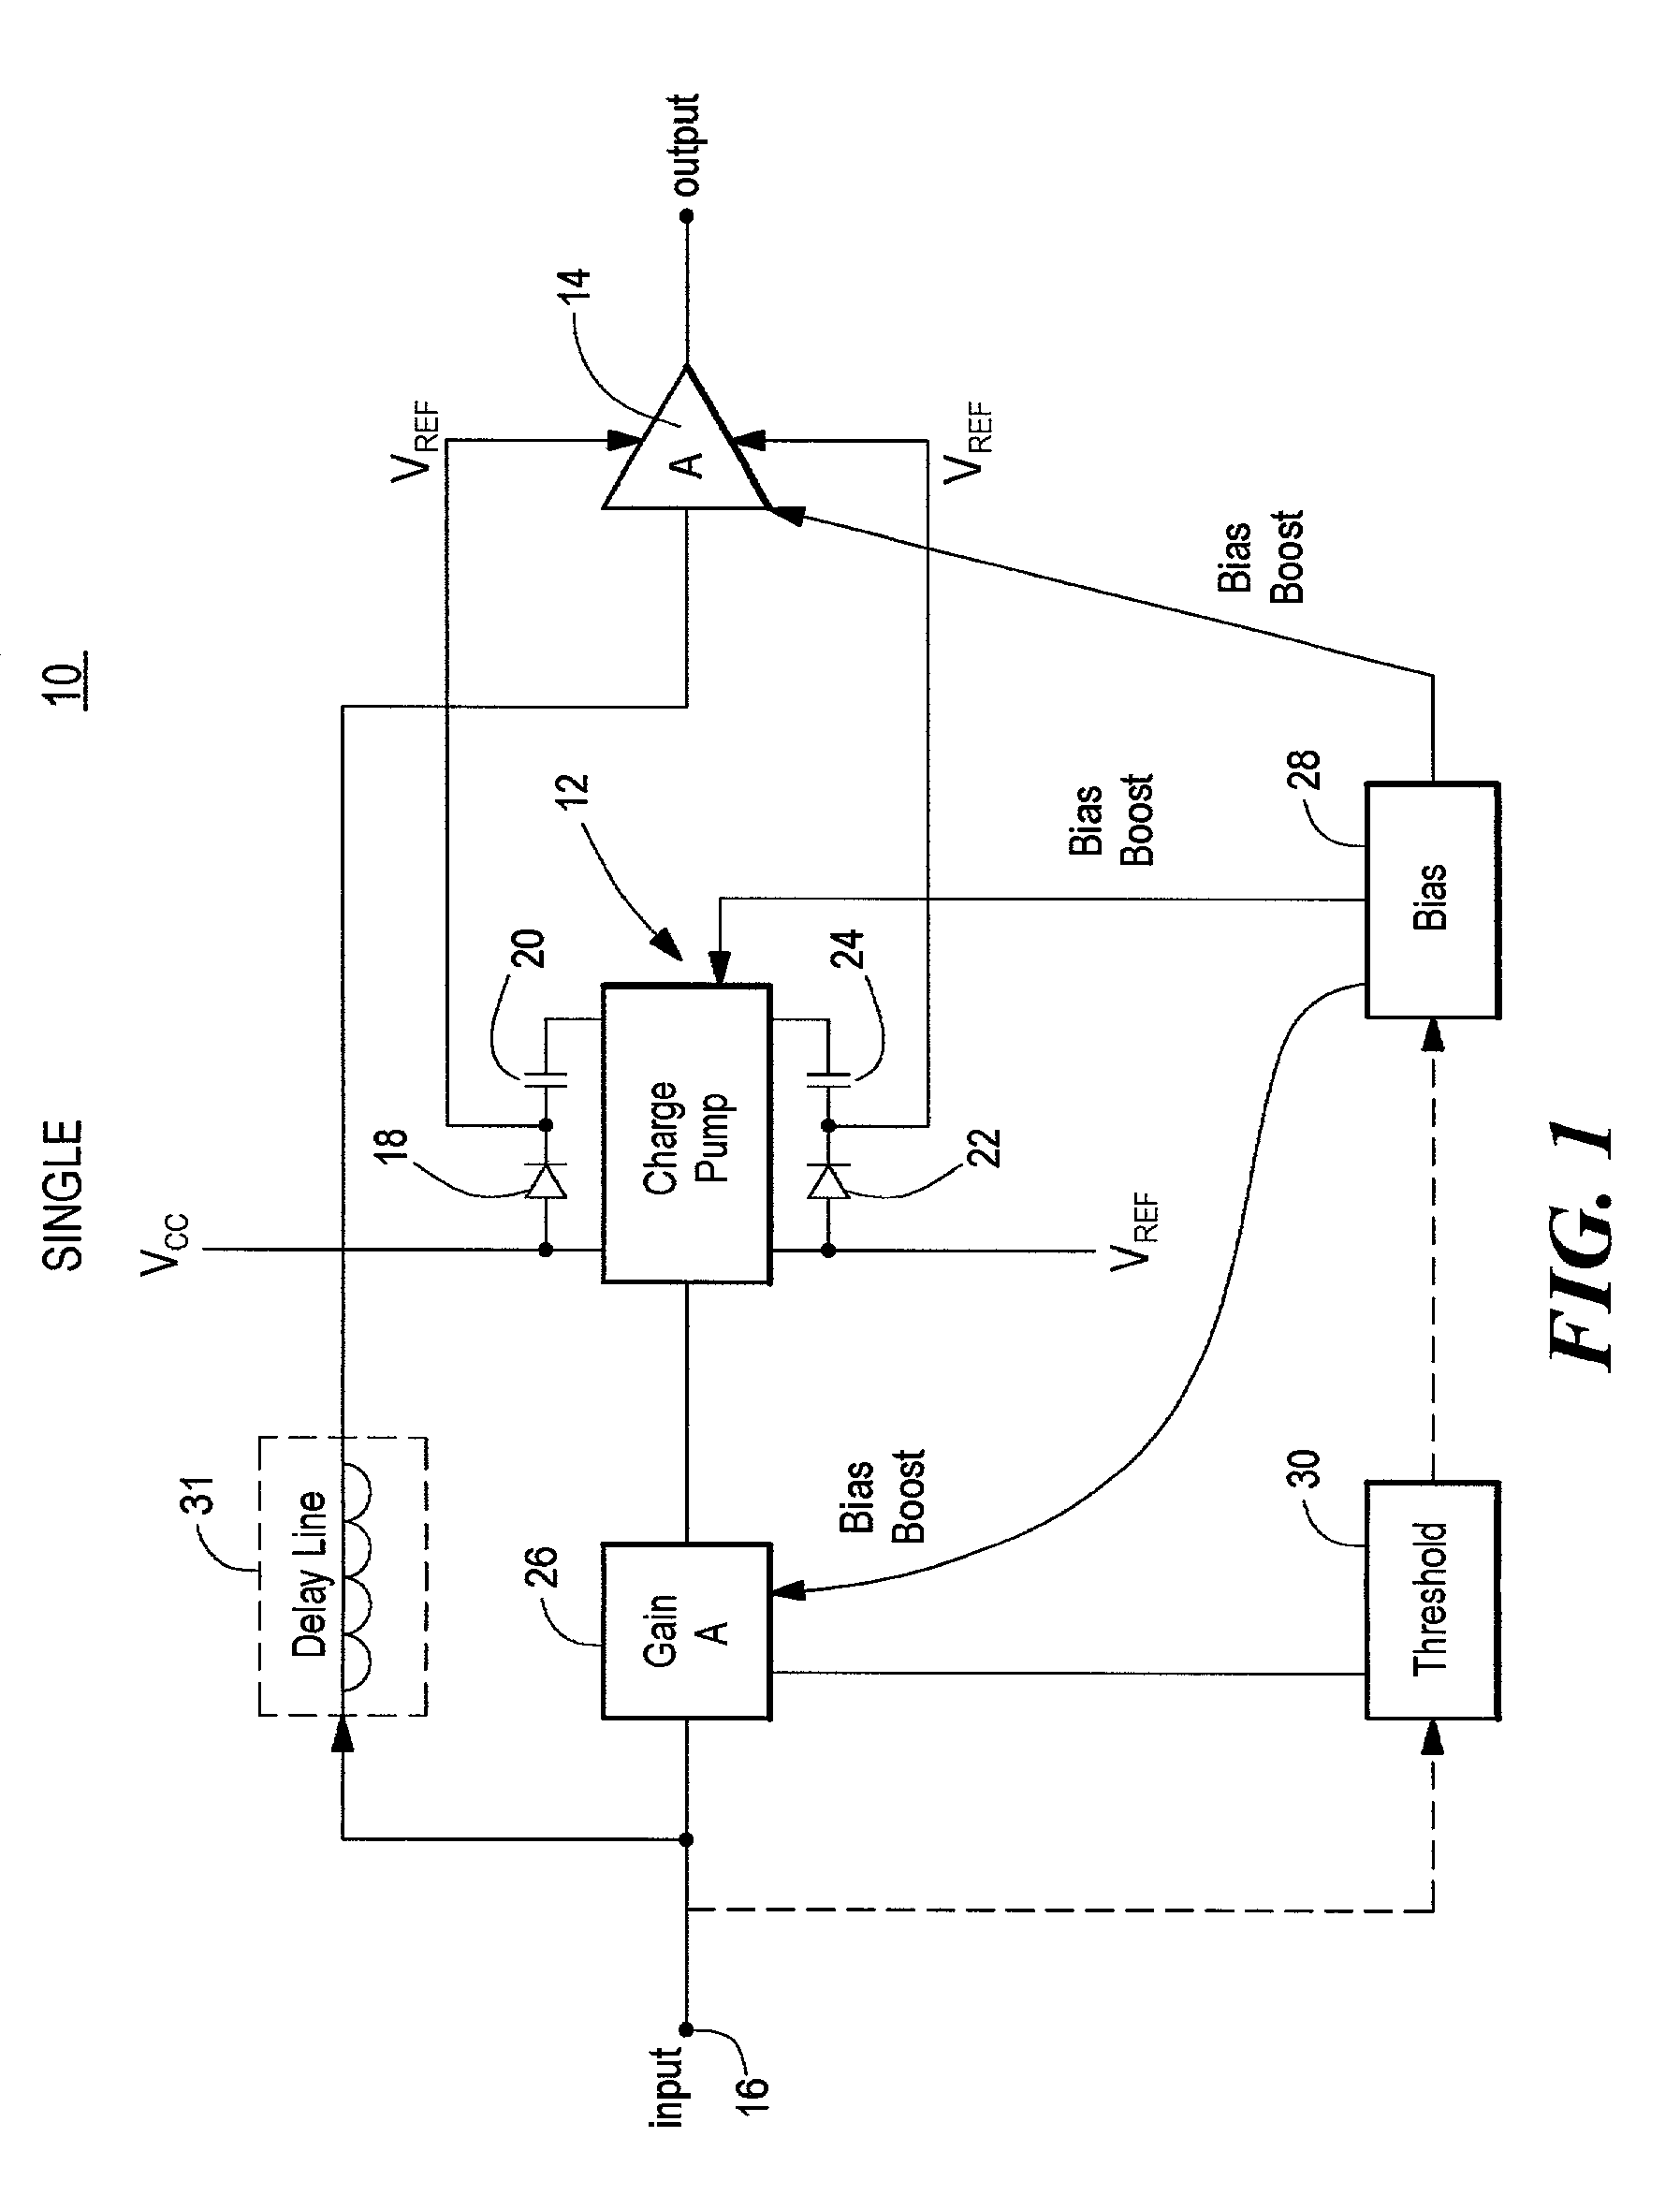 Amplifier system with on-demand power supply boost